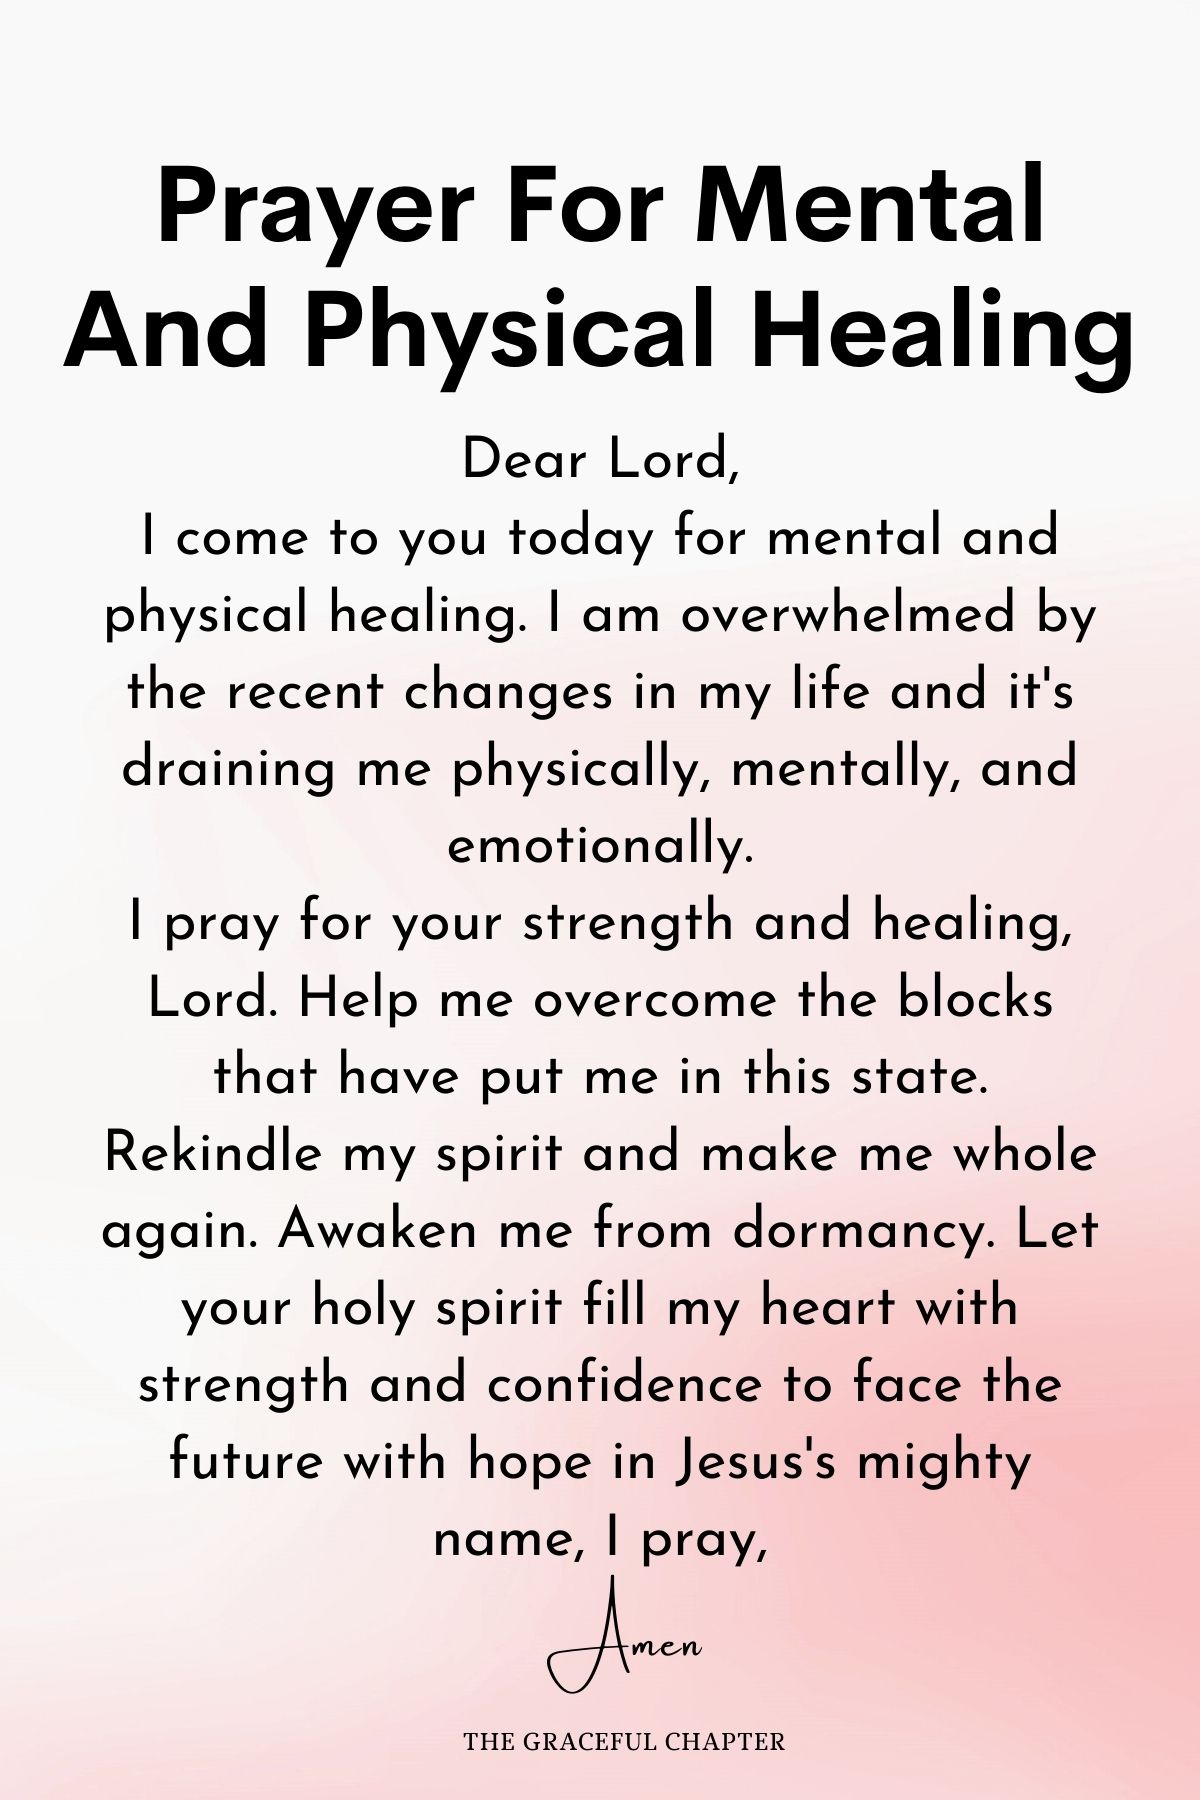 Prayer for mental and physical healing